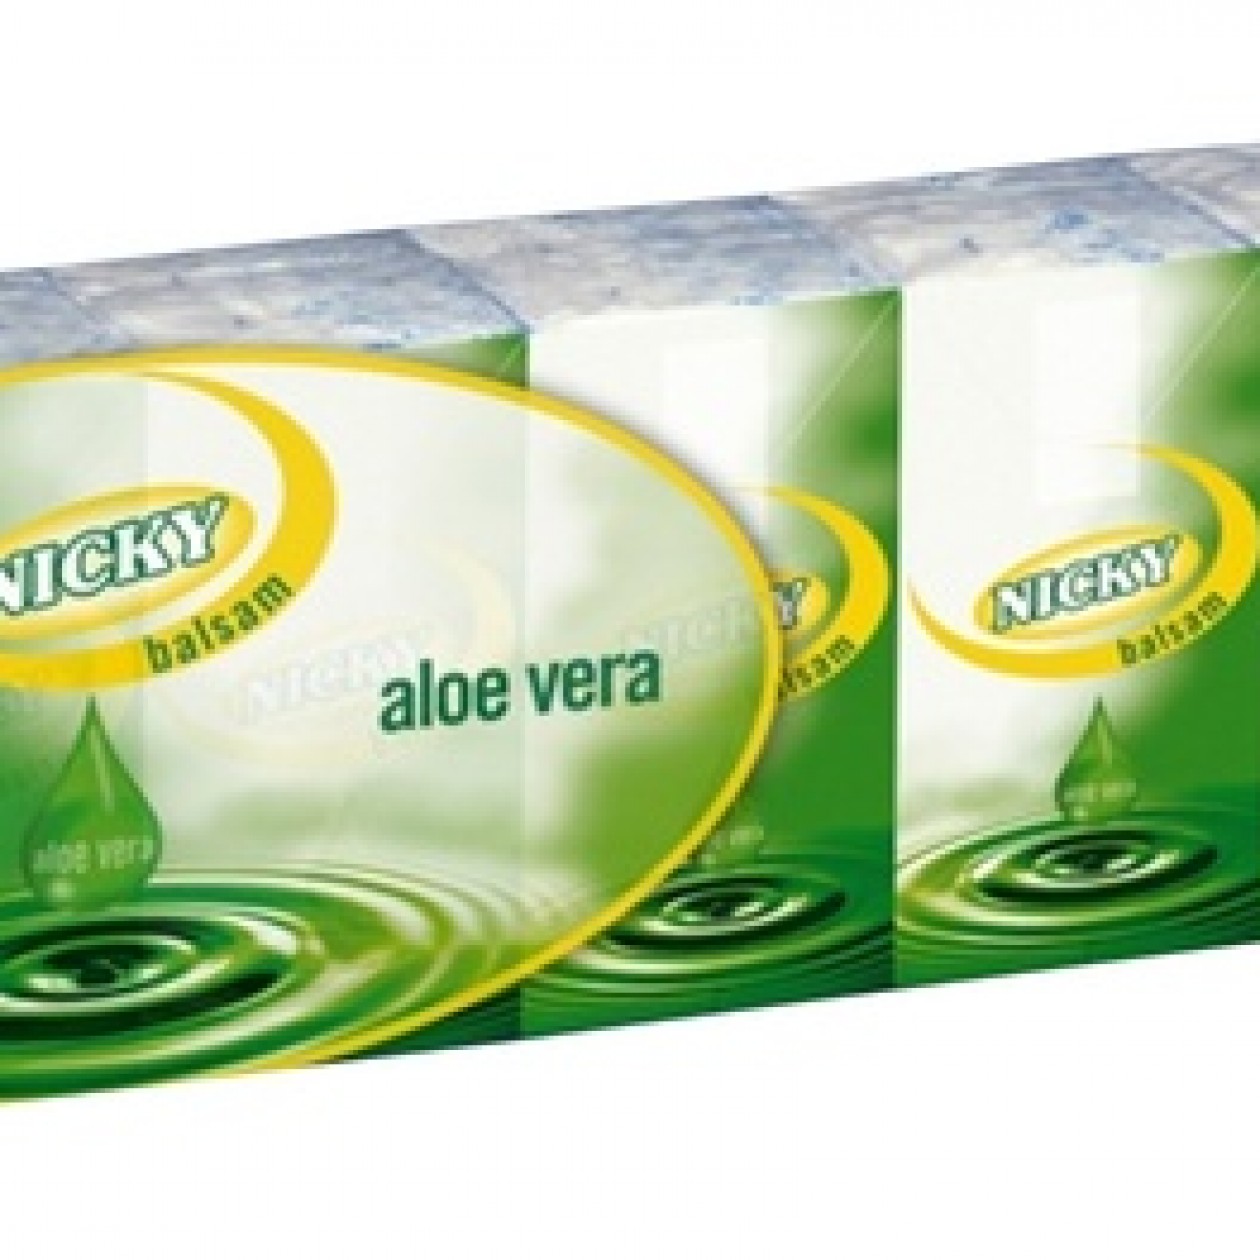 Nicky Balsam with Aloe Vera Soft Pocket Tissues 10 Pack 4 Ply 9 Tissues Per Pack